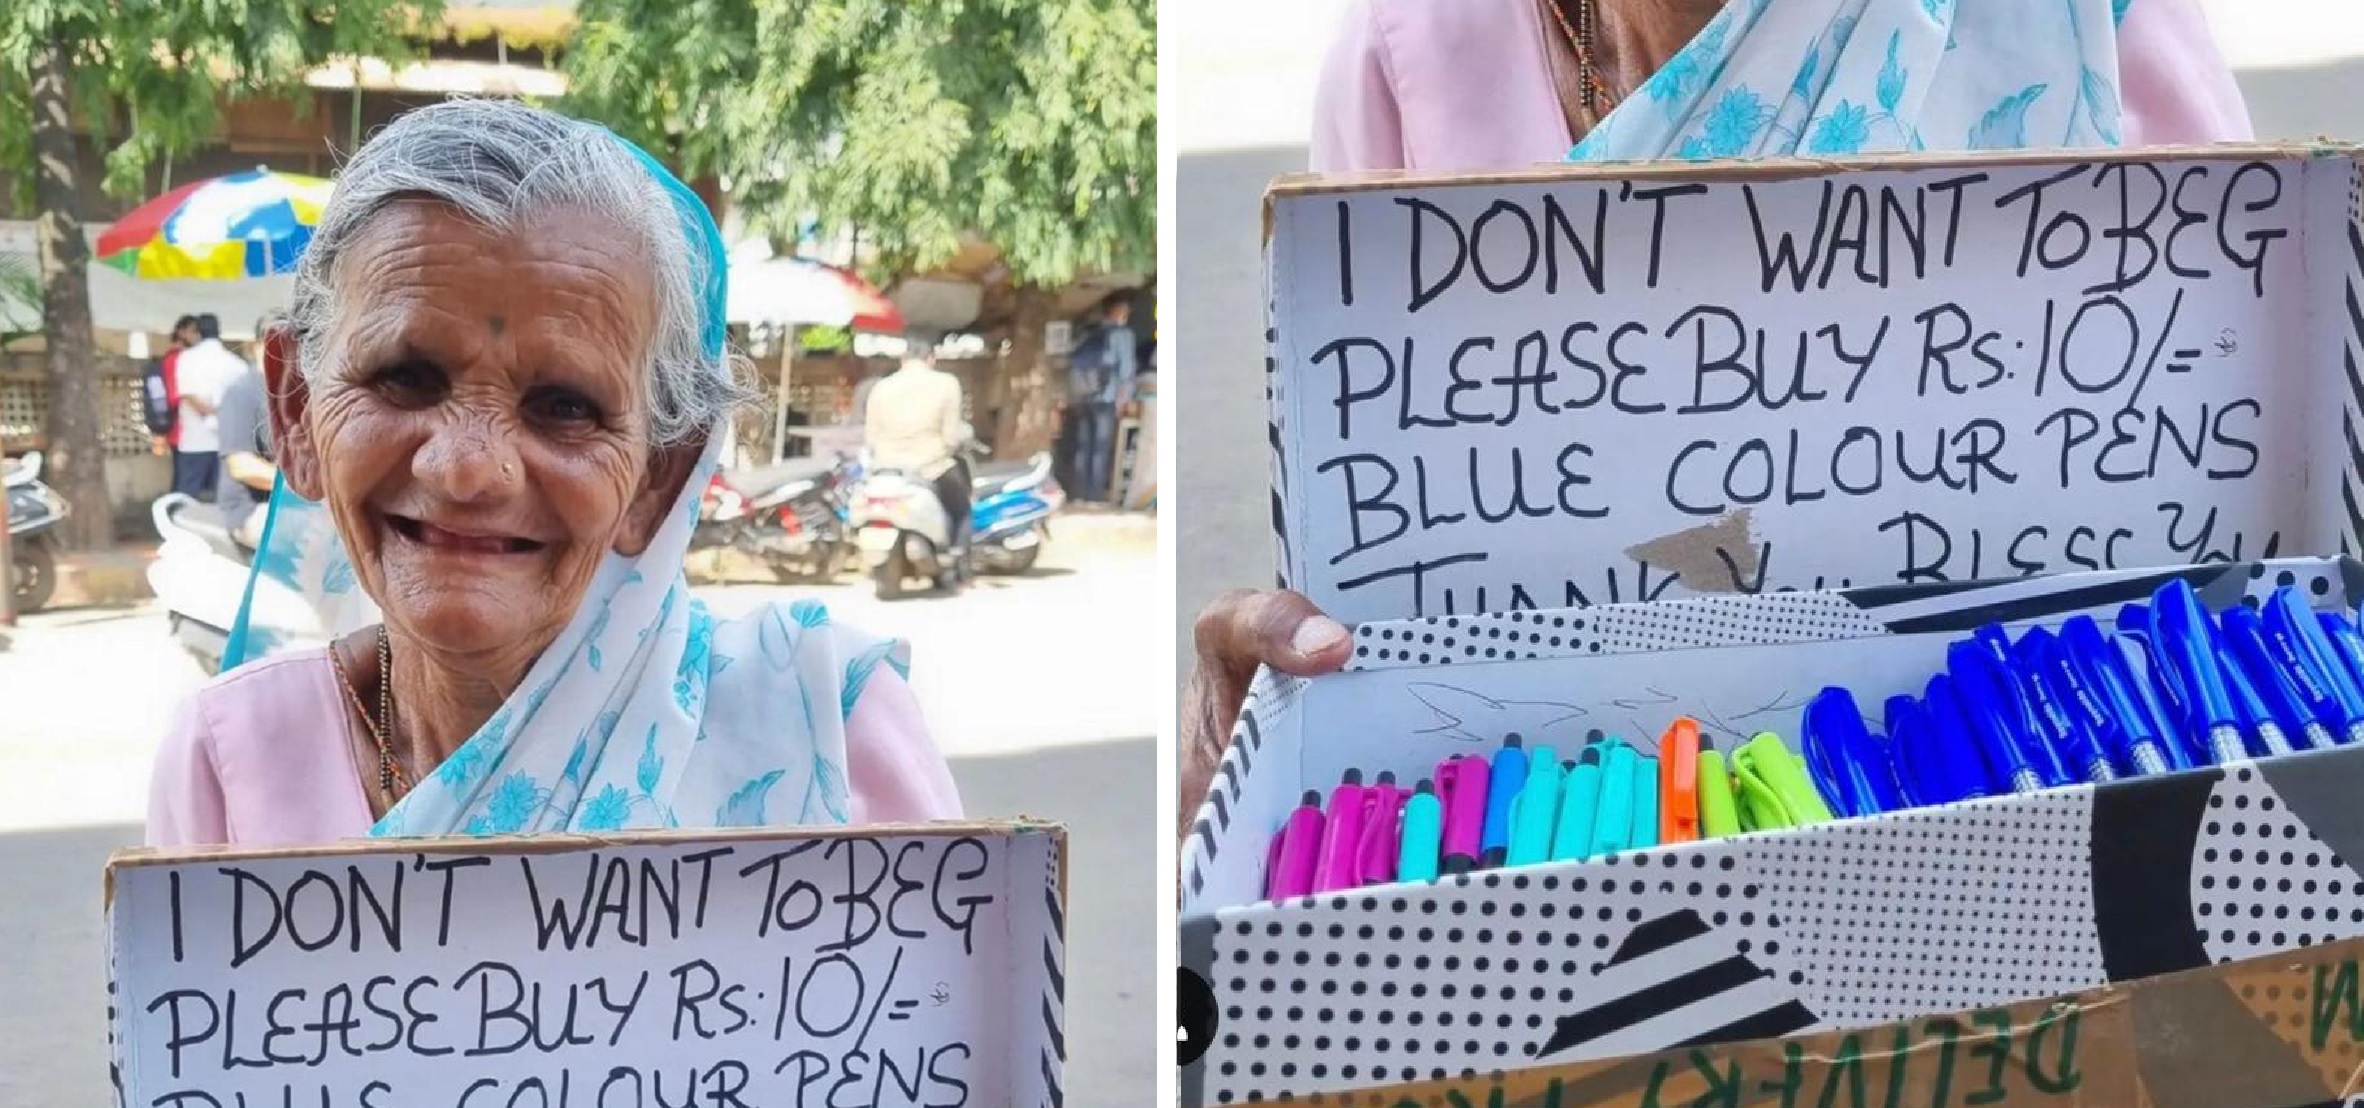 Elderly Pune Woman Sells Pens Everyday For A Living, ‘I Don’t Want To Beg’